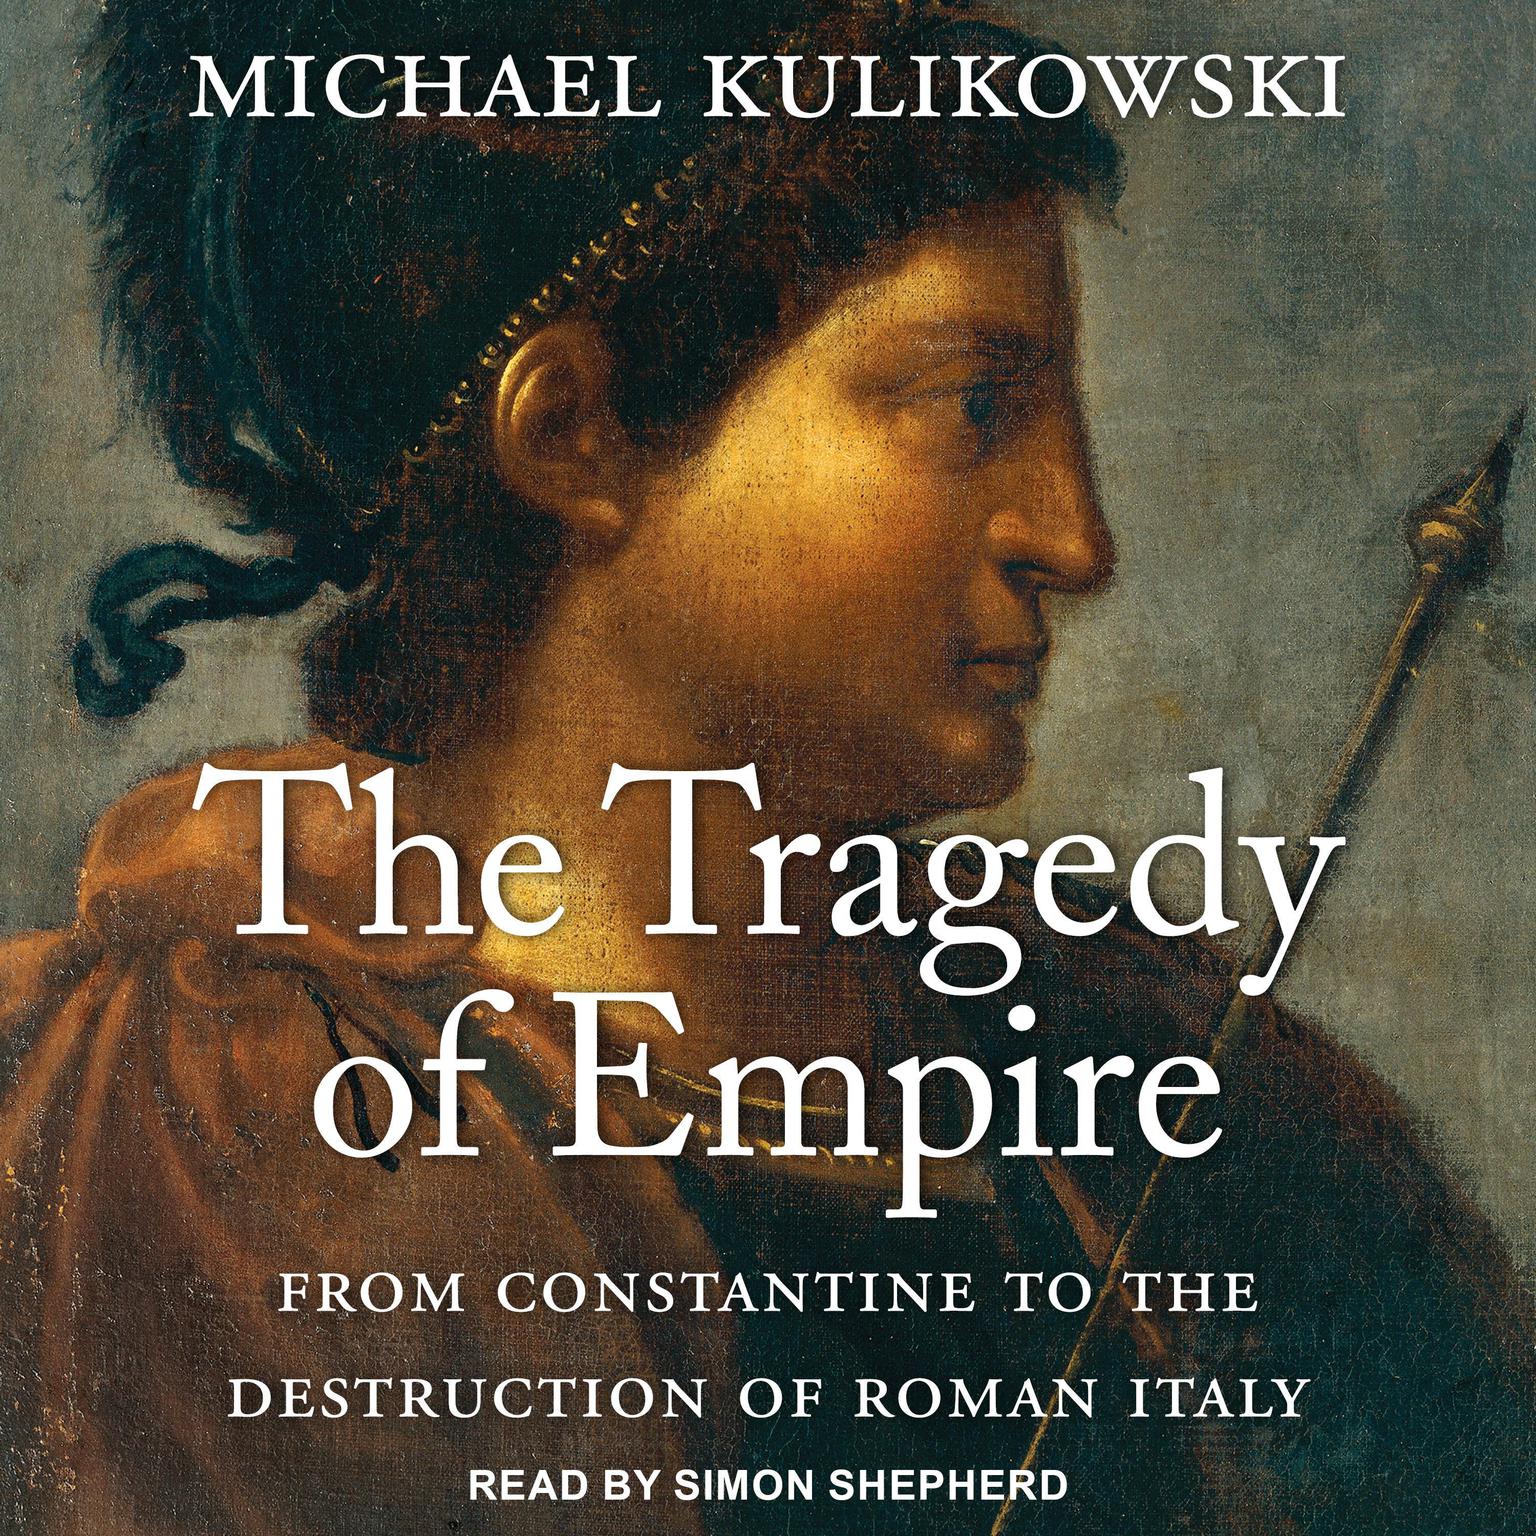 The Tragedy of Empire: From Constantine to the Destruction of Roman Italy Audiobook, by Michael Kulikowski